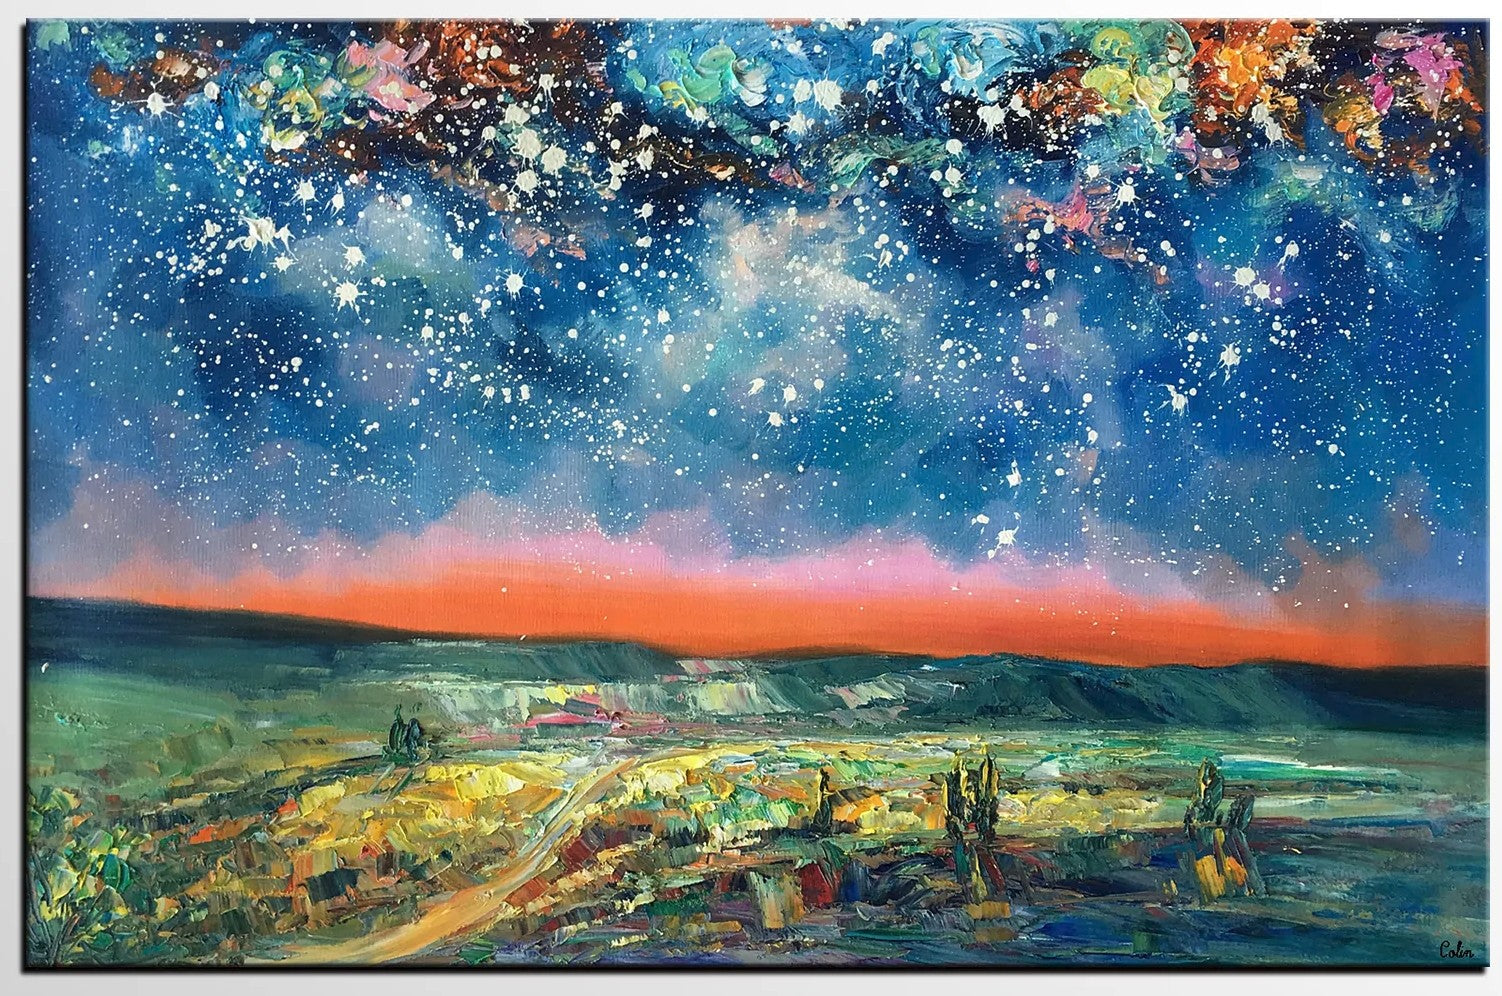 Landacape Canvas Painting, Starry Night Sky Painting, Original Landscape Painting, Heavy Texture Art Painting, Palette Knife Painting